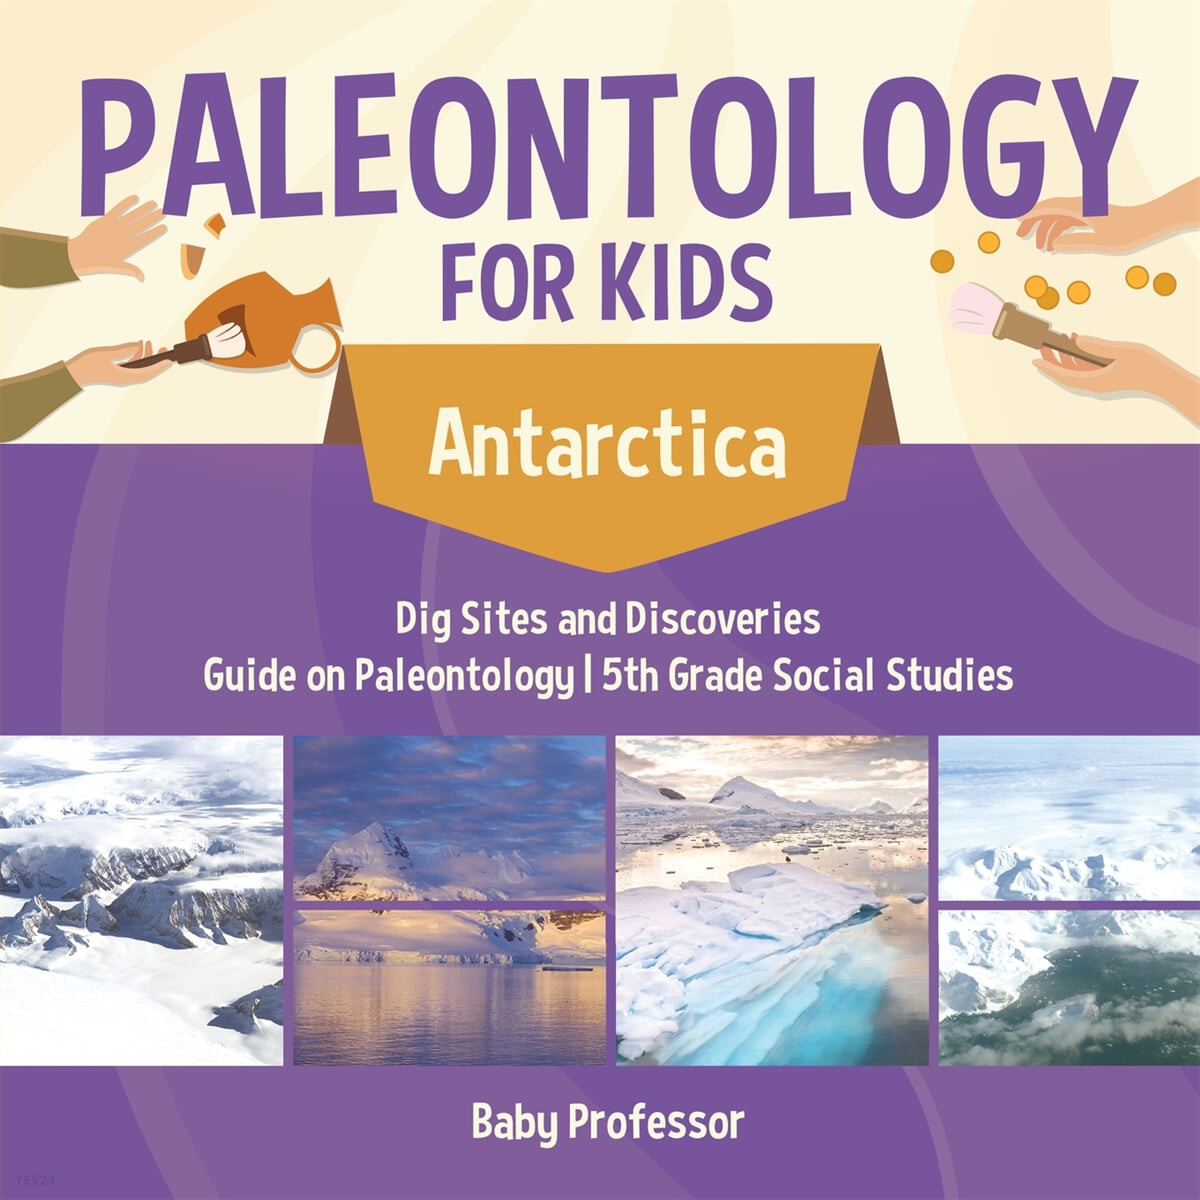 Paleontology for Kids - Antarctica - Dig Sites and Discoveries - Guide on Paleontology - 5th Grade Social Studies